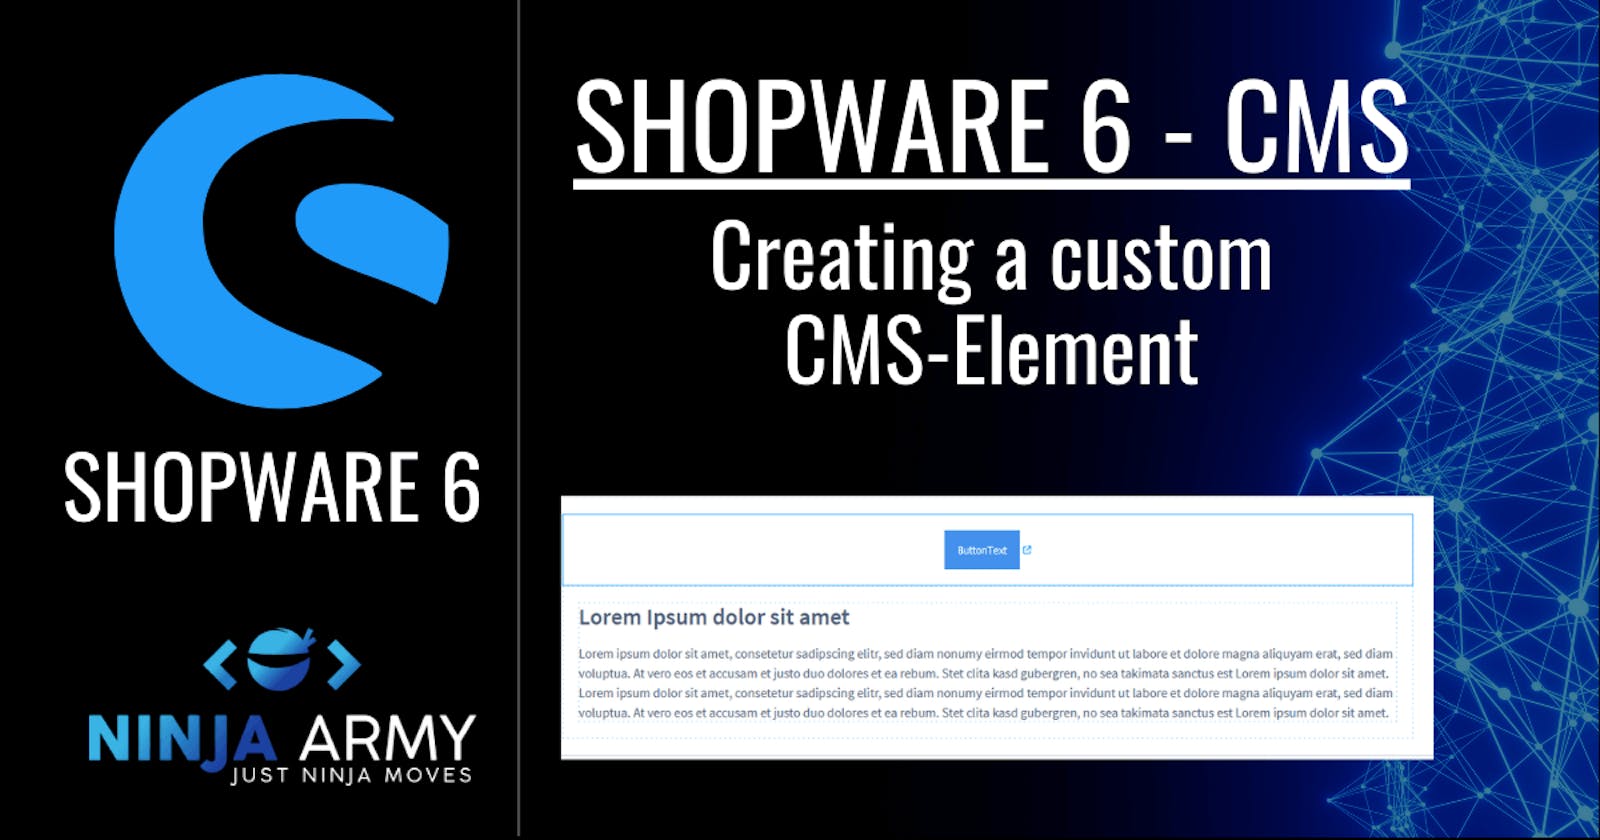 How to create a CMS-Element in Shopware 6